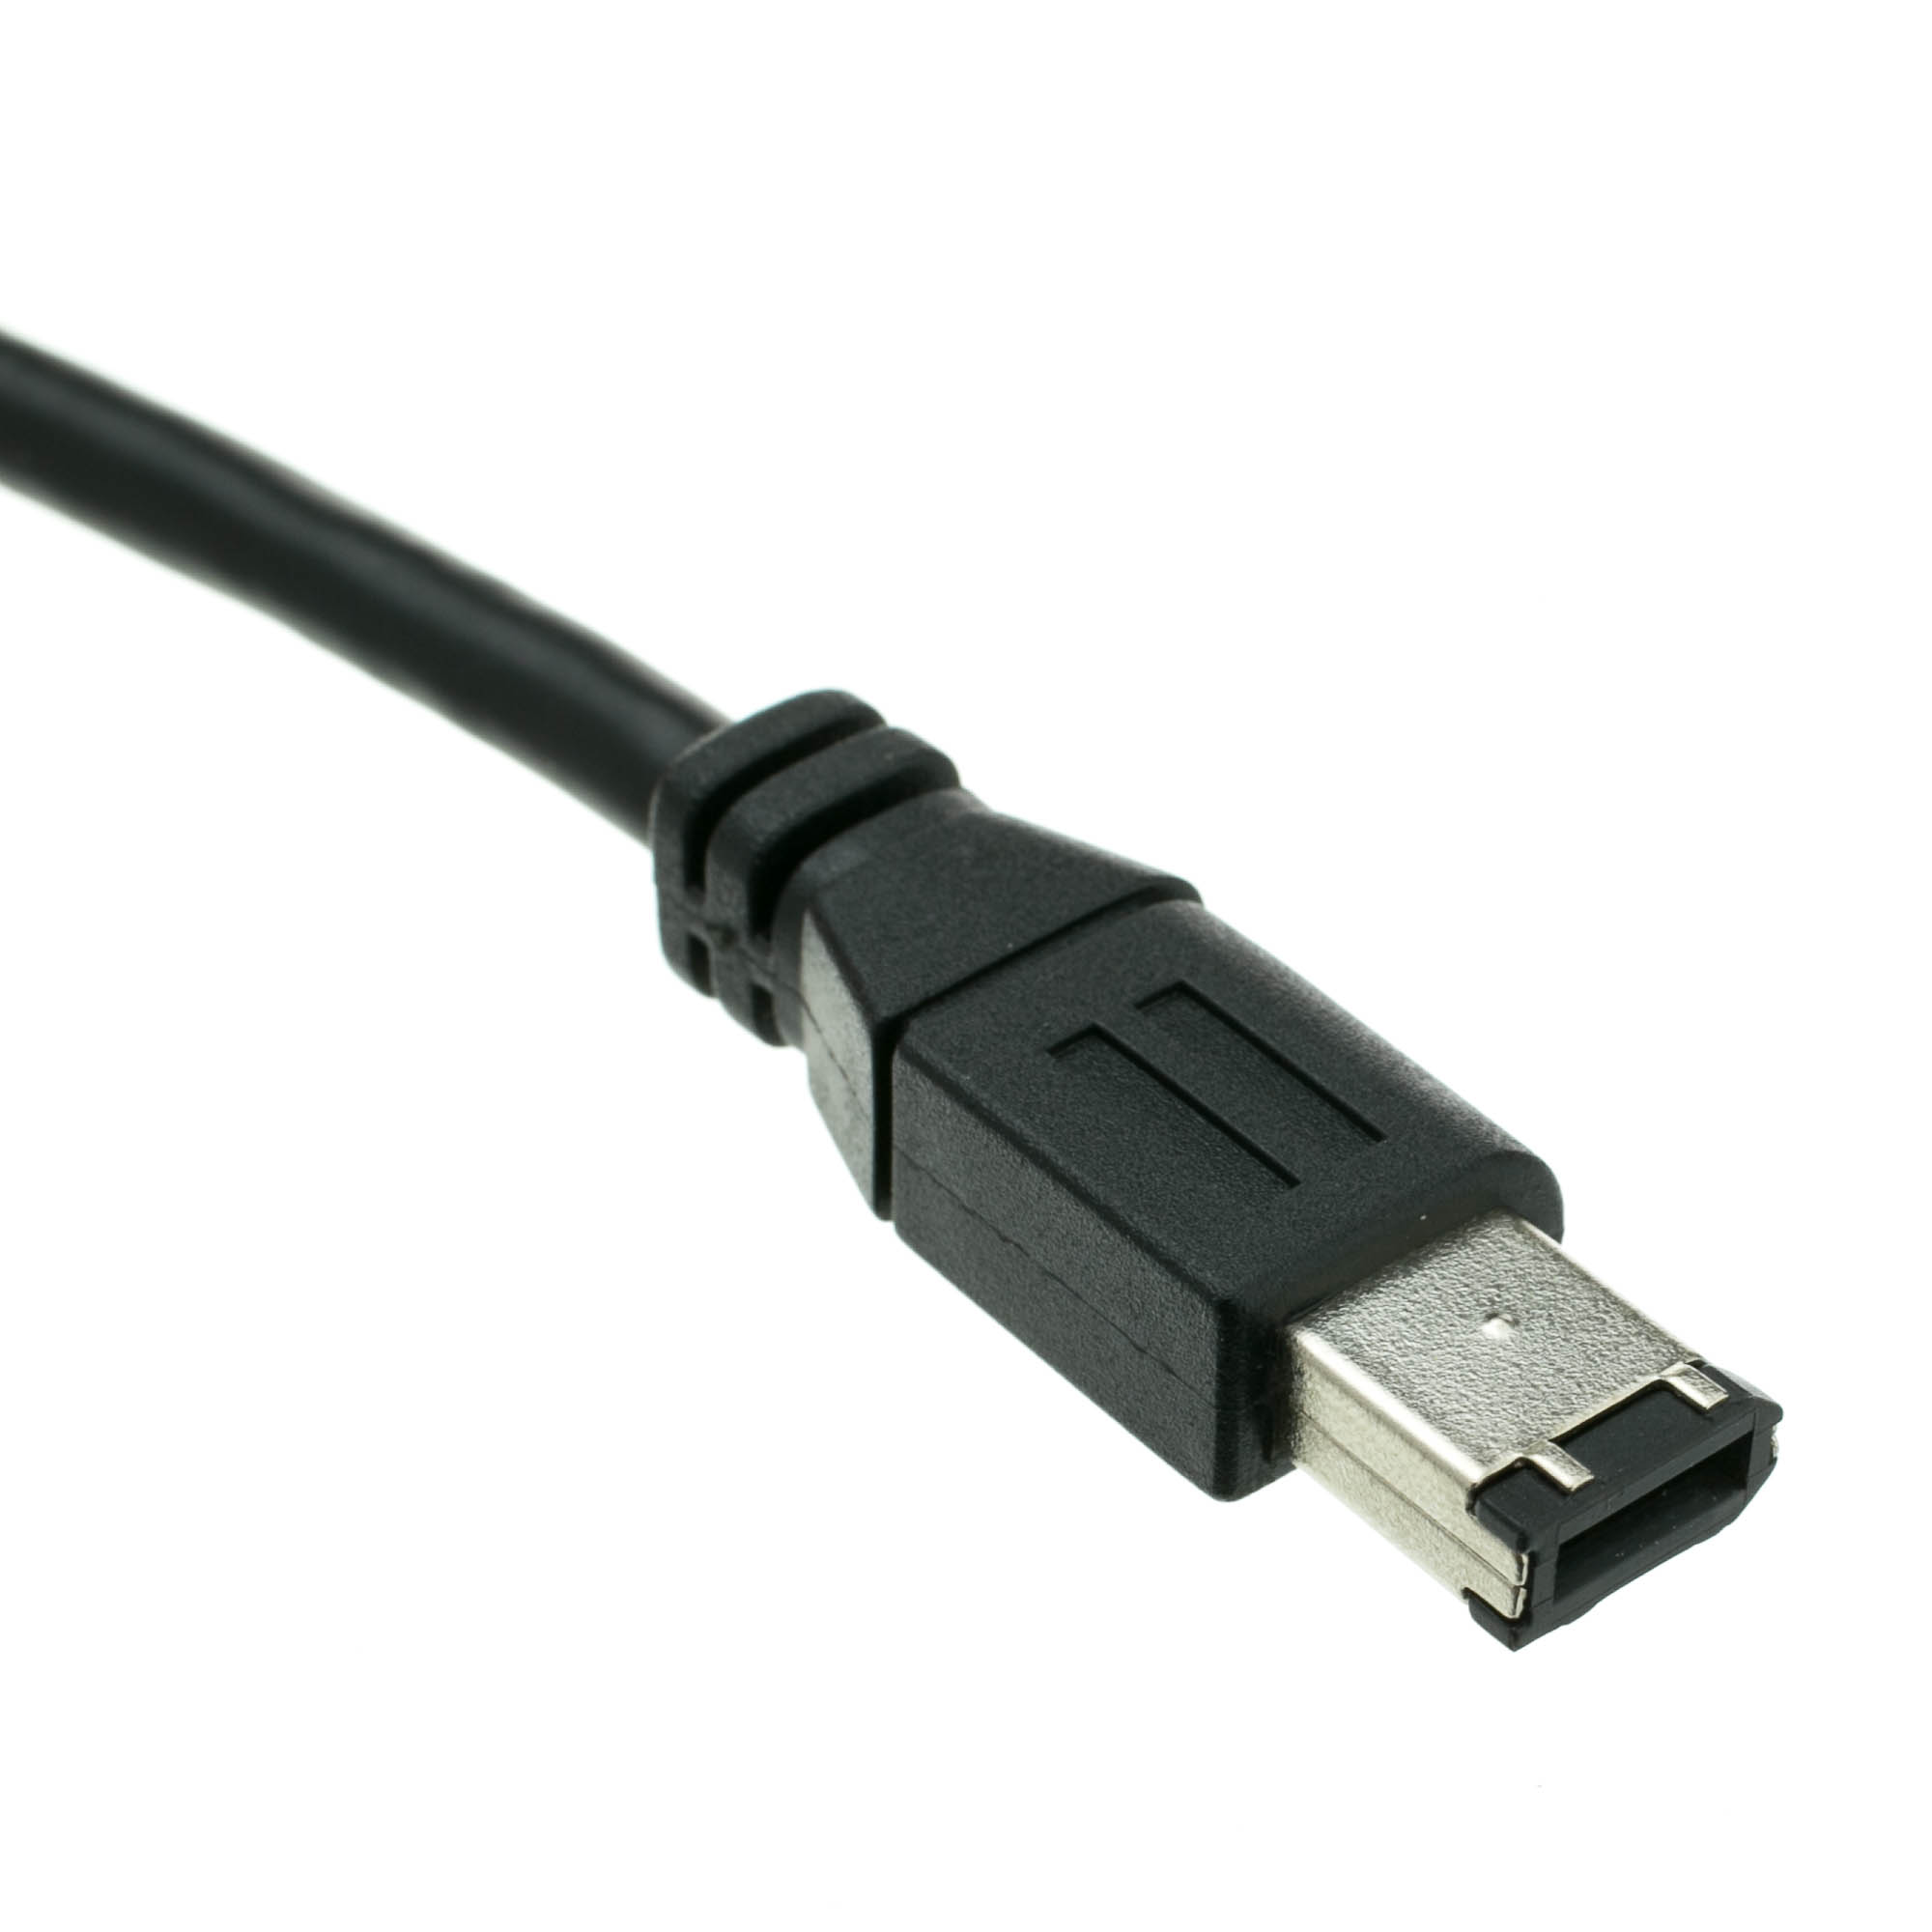 15ft 6 pin Male to 6 pin Male Black Firewire 400/400 Cable for IEEE 1394 Devices